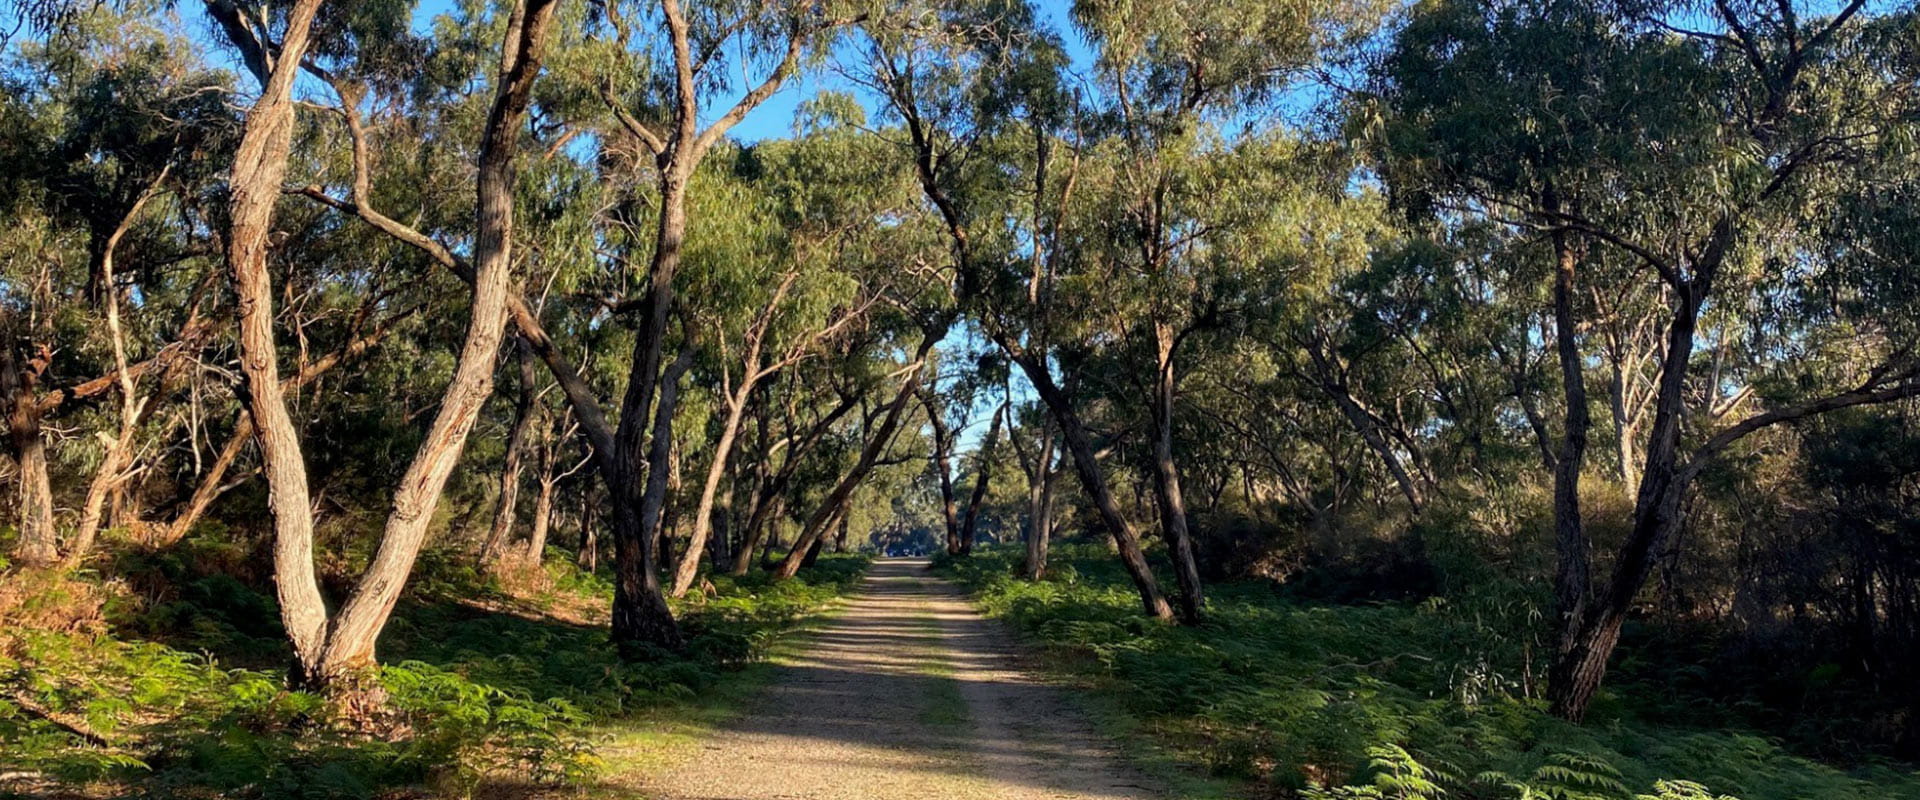 A wide track leads towards bushland surrounded by tall native trees